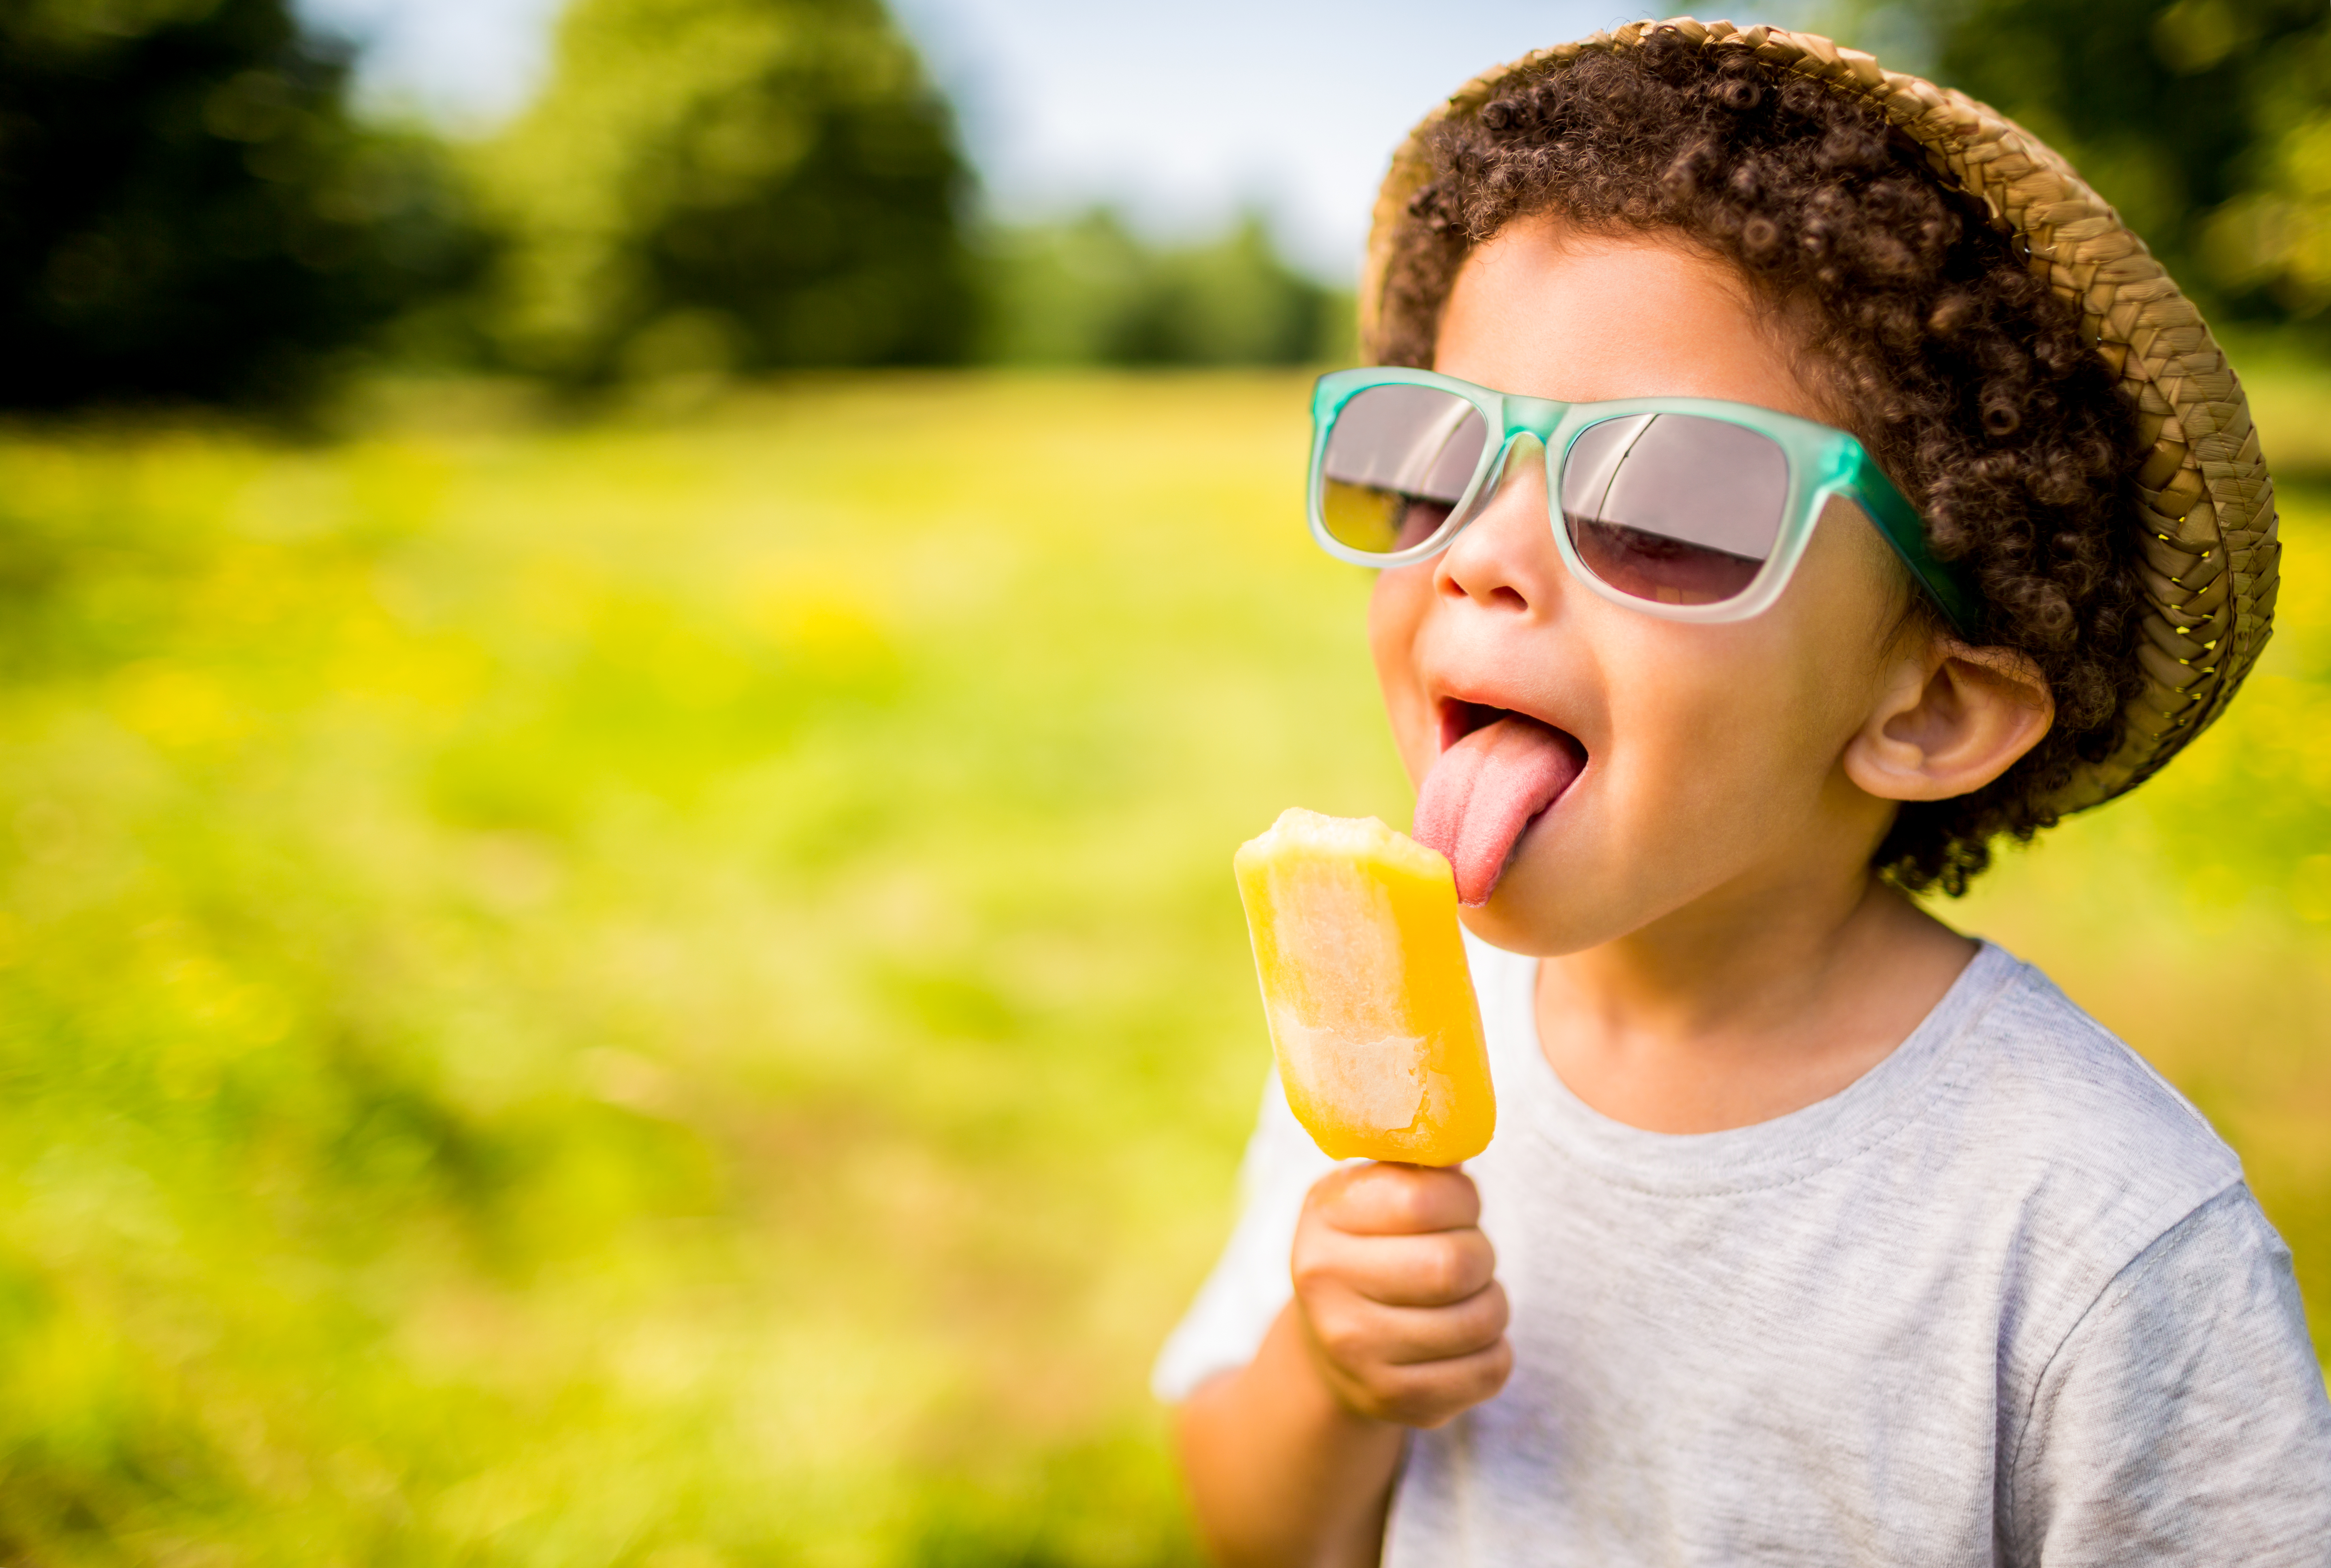 Boy in sunglasses and hat eating popsicle outdoors | Source: Getty Images